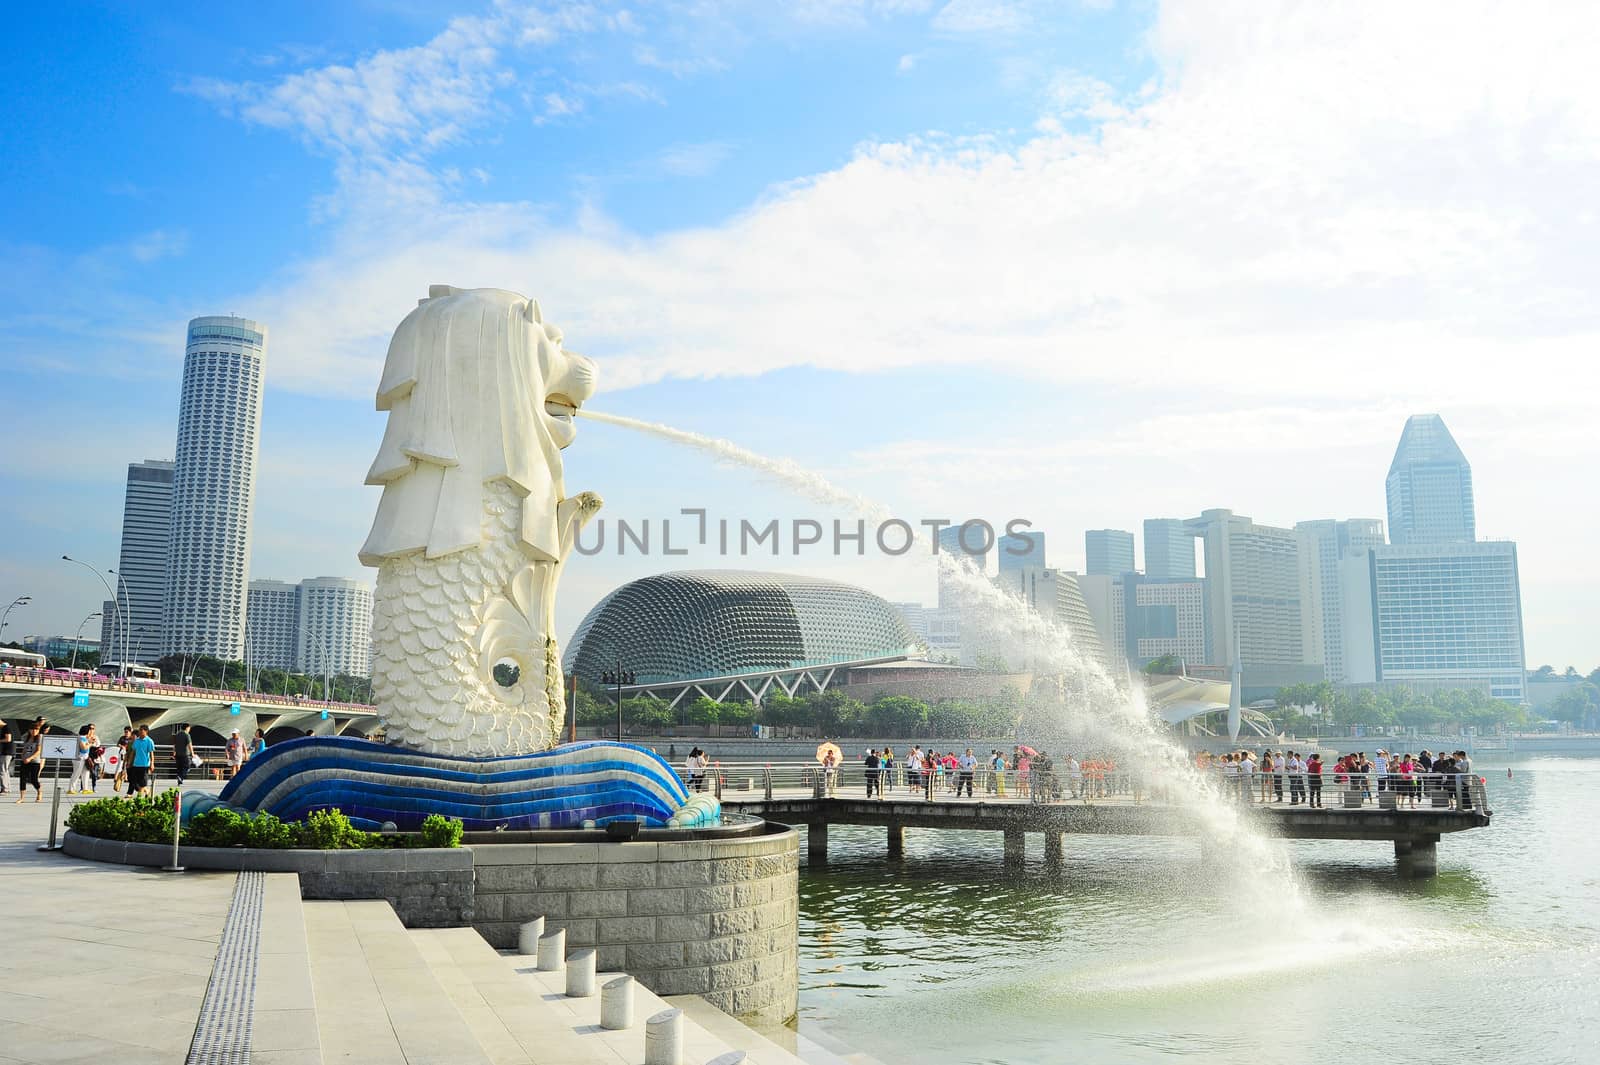 Singapore, Republic of Singapore - May 08, 2013: Tourists at the Merlion fountain in front of Esplanade Theatres on the Bay in Singapore. Merlion is a imaginary creature with the head of a lion, seen as a symbol of Singapore